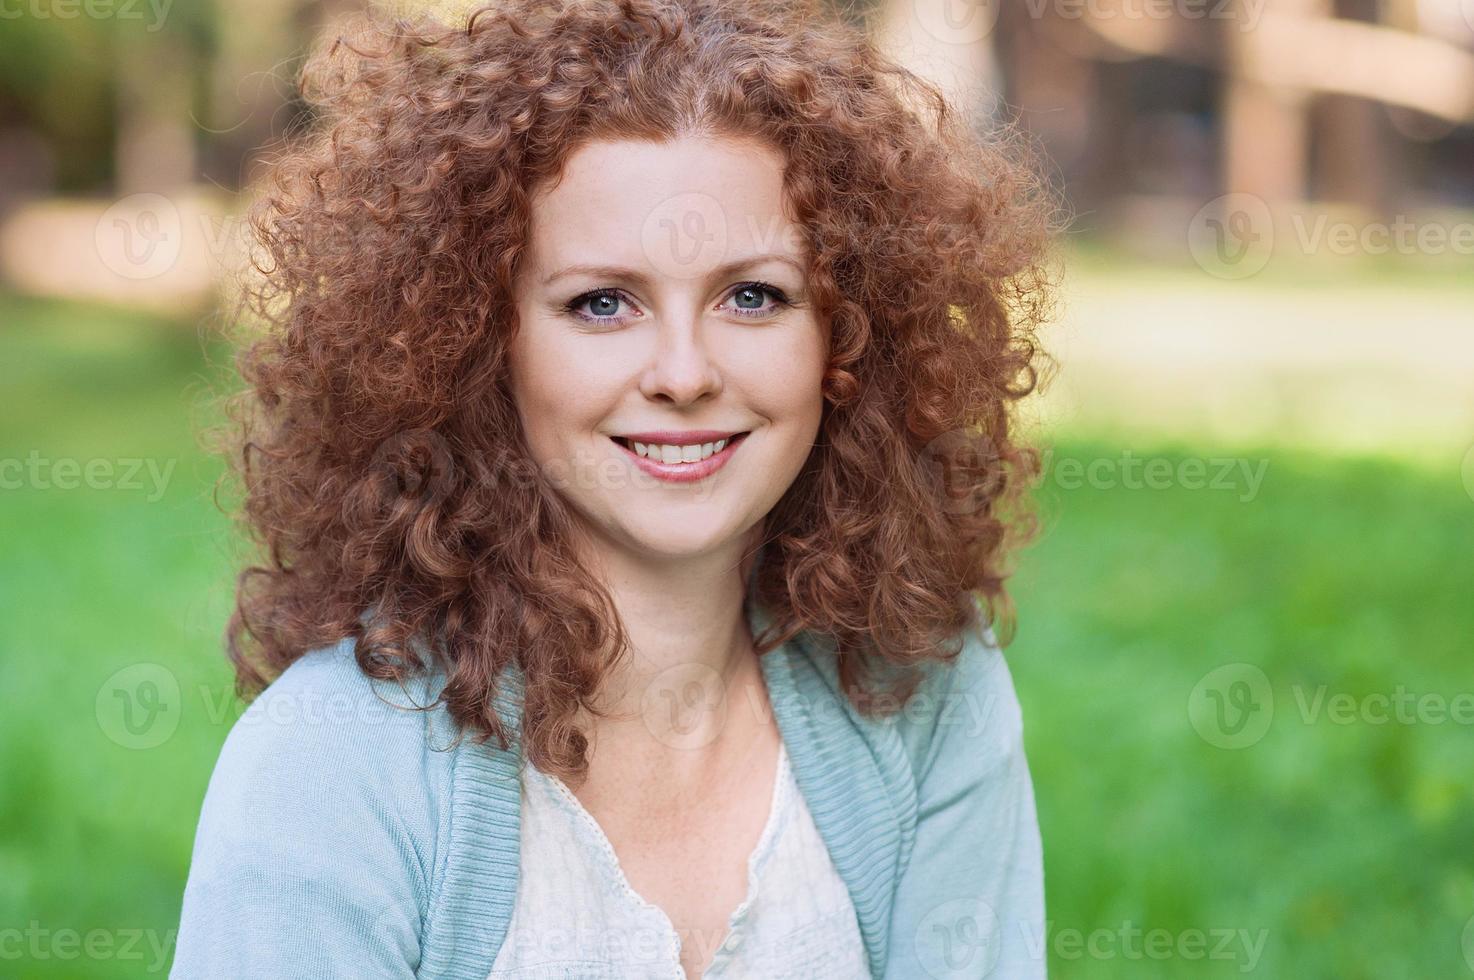 Smiling young woman outdoors photo